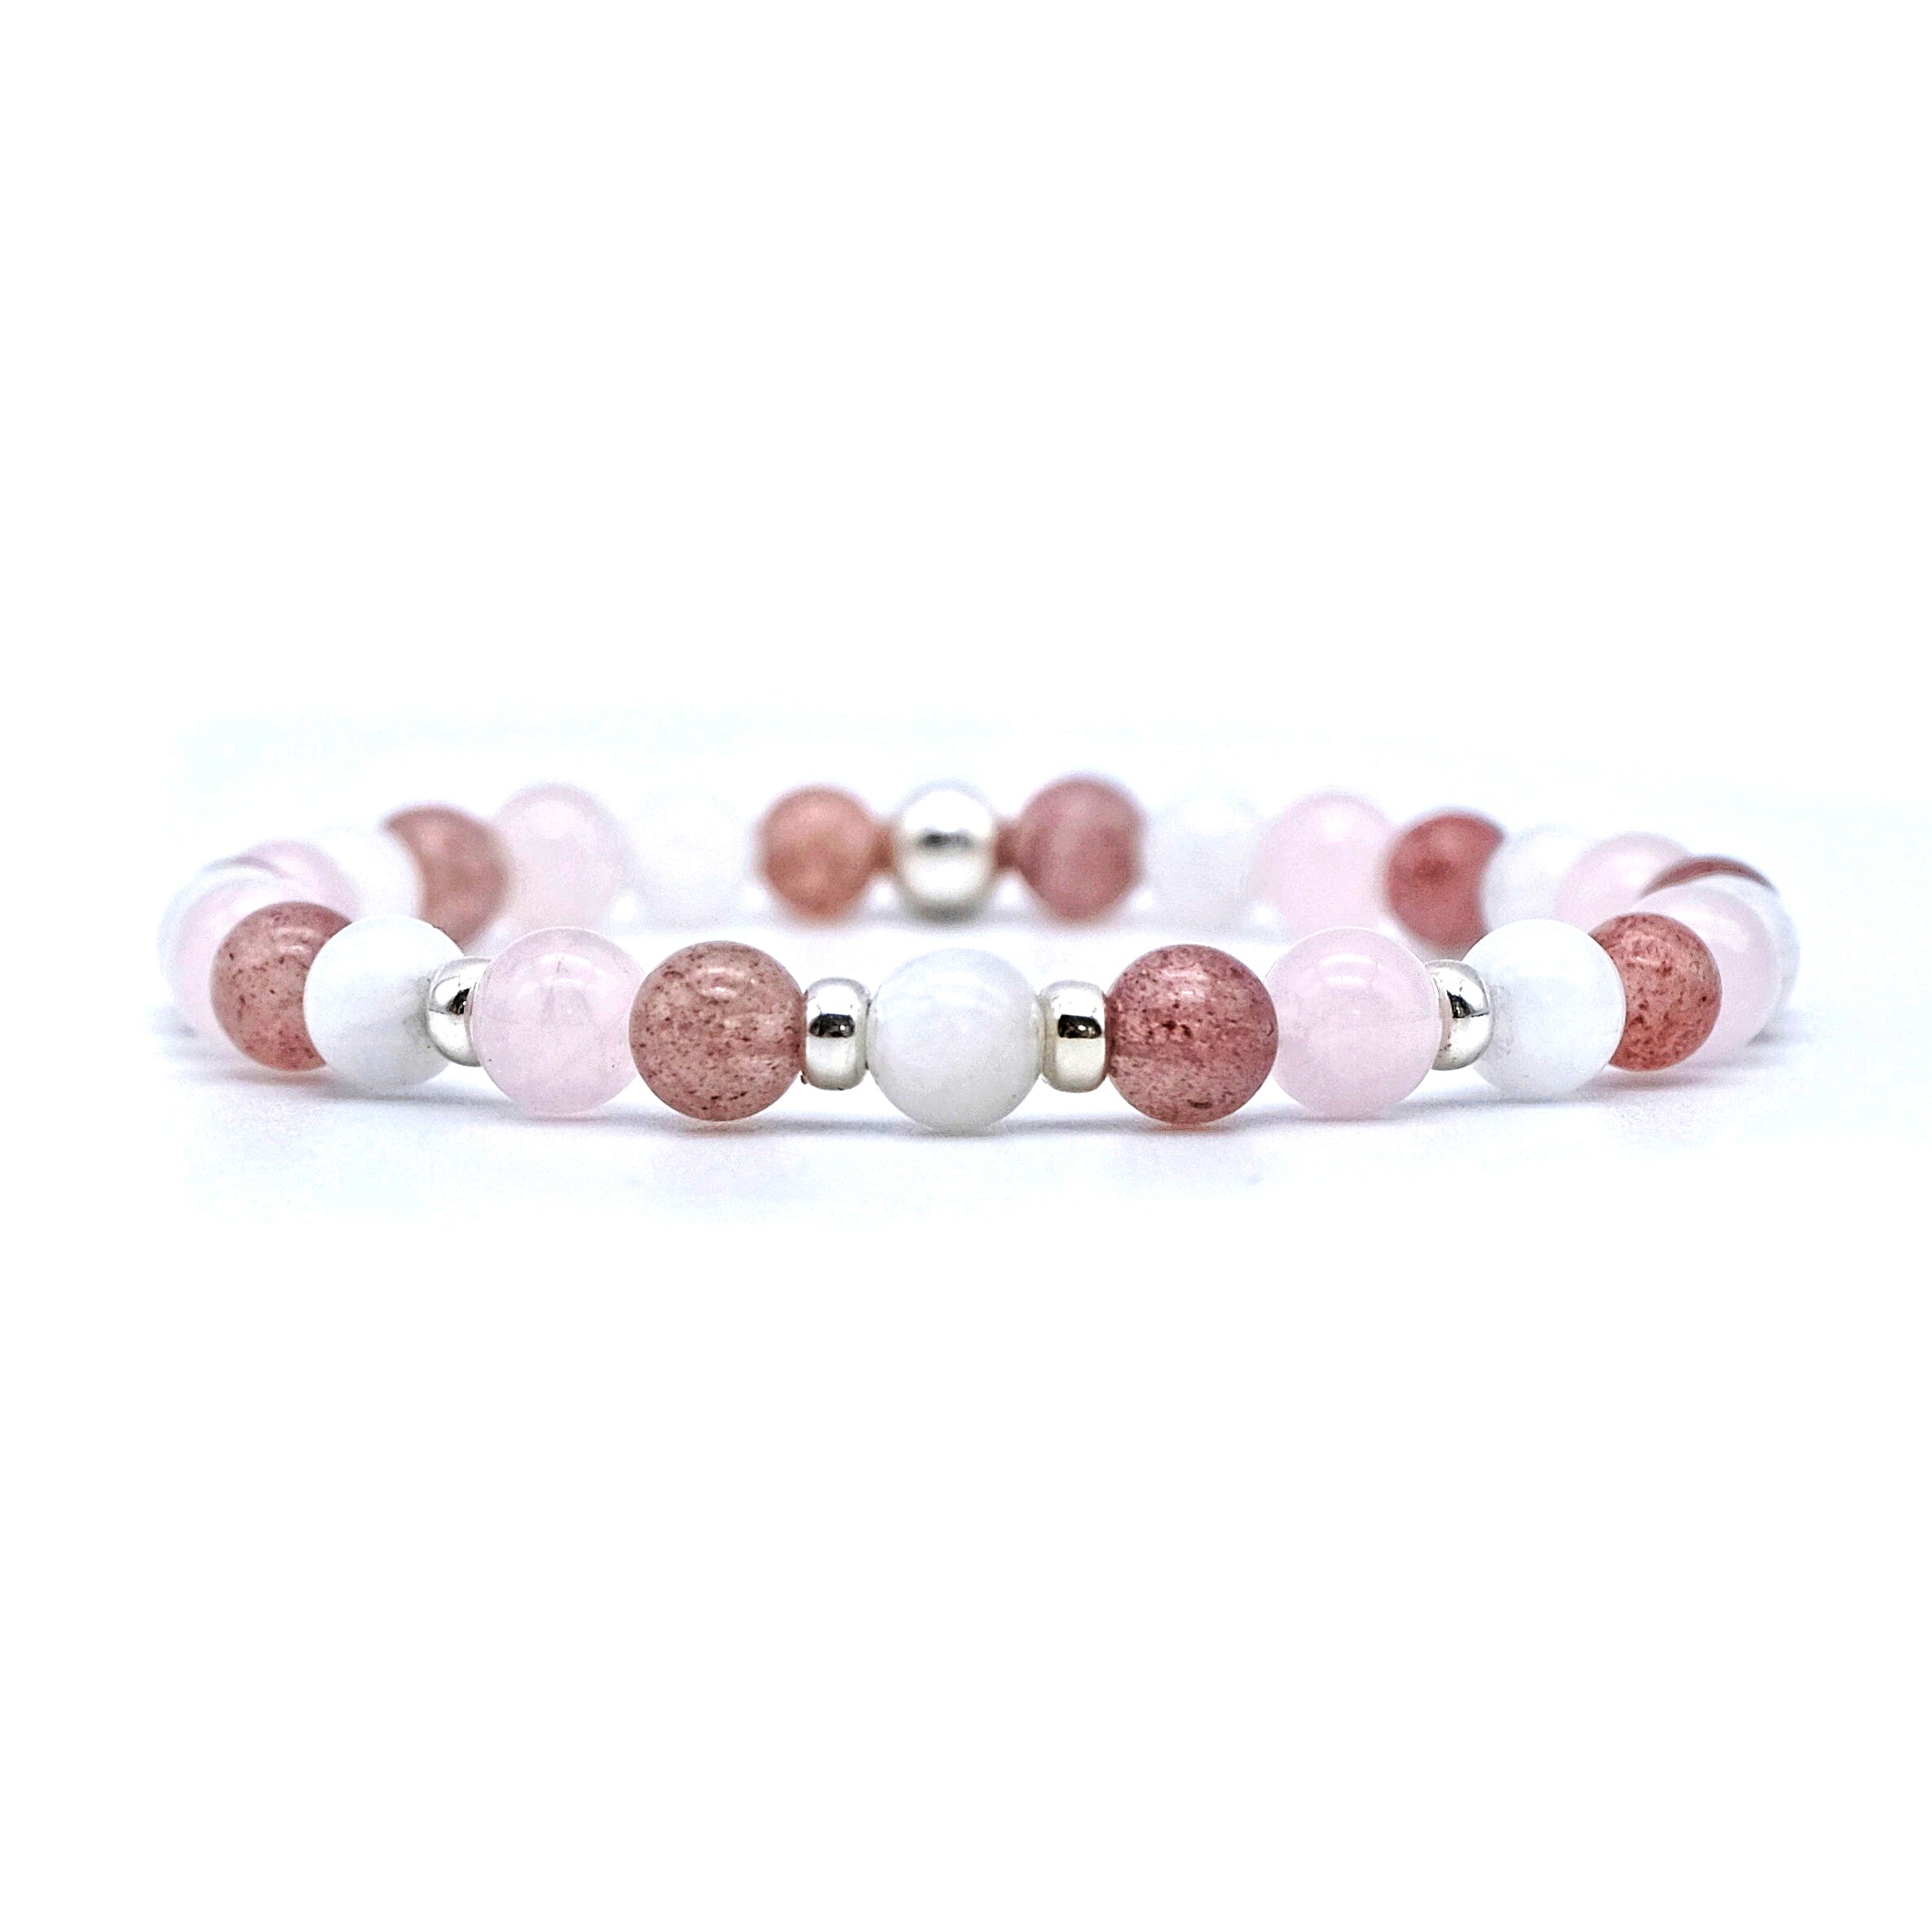 A moonstone, strawberry quartz and rose quartz gemstone bracelet in 6mm beads with silver accessories